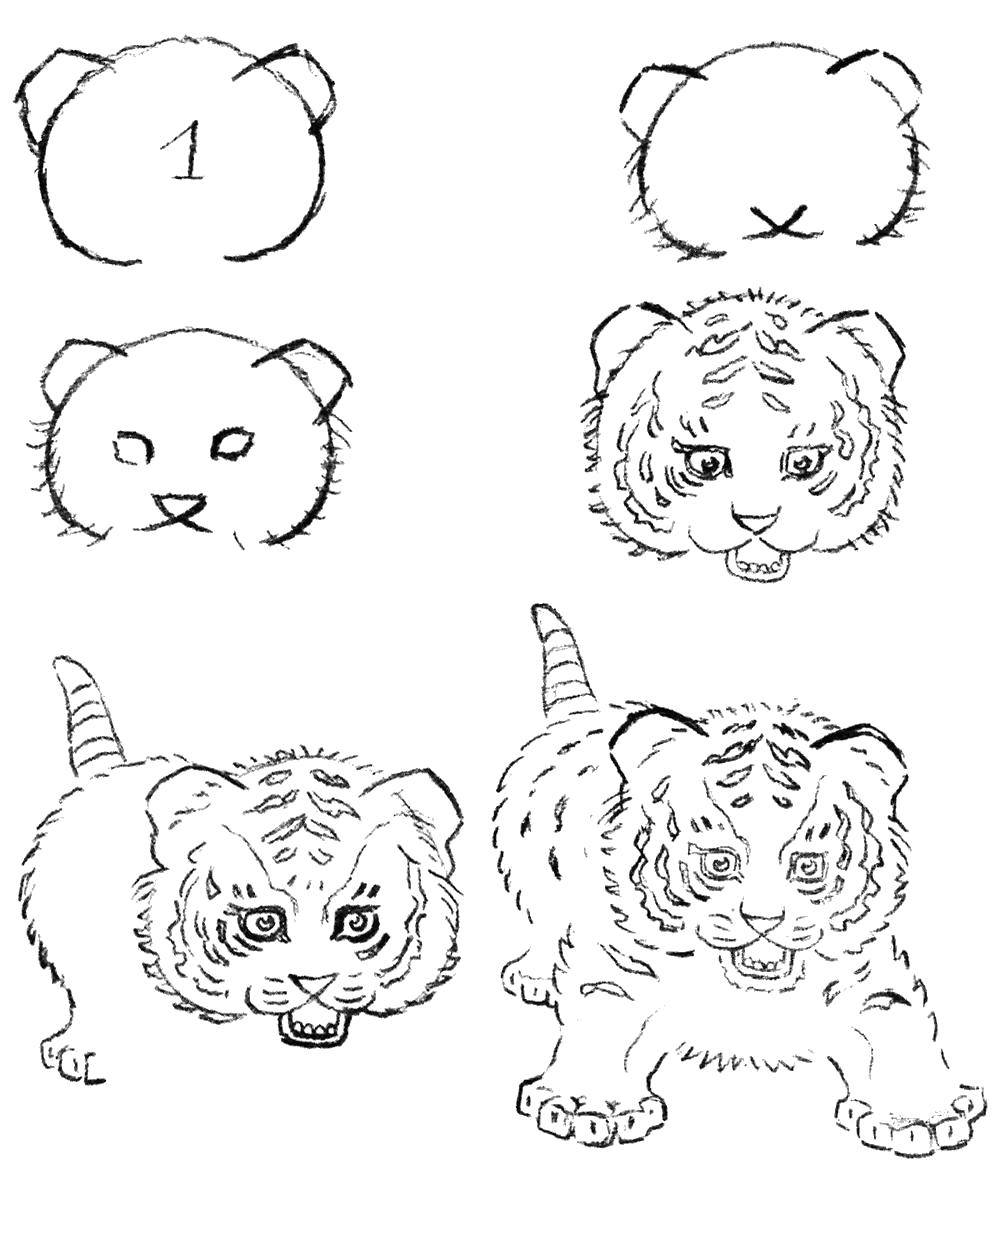 Coloring Drawing a tiger cub. Category how to draw by stages in pencil. Tags:  Animals, tiger.